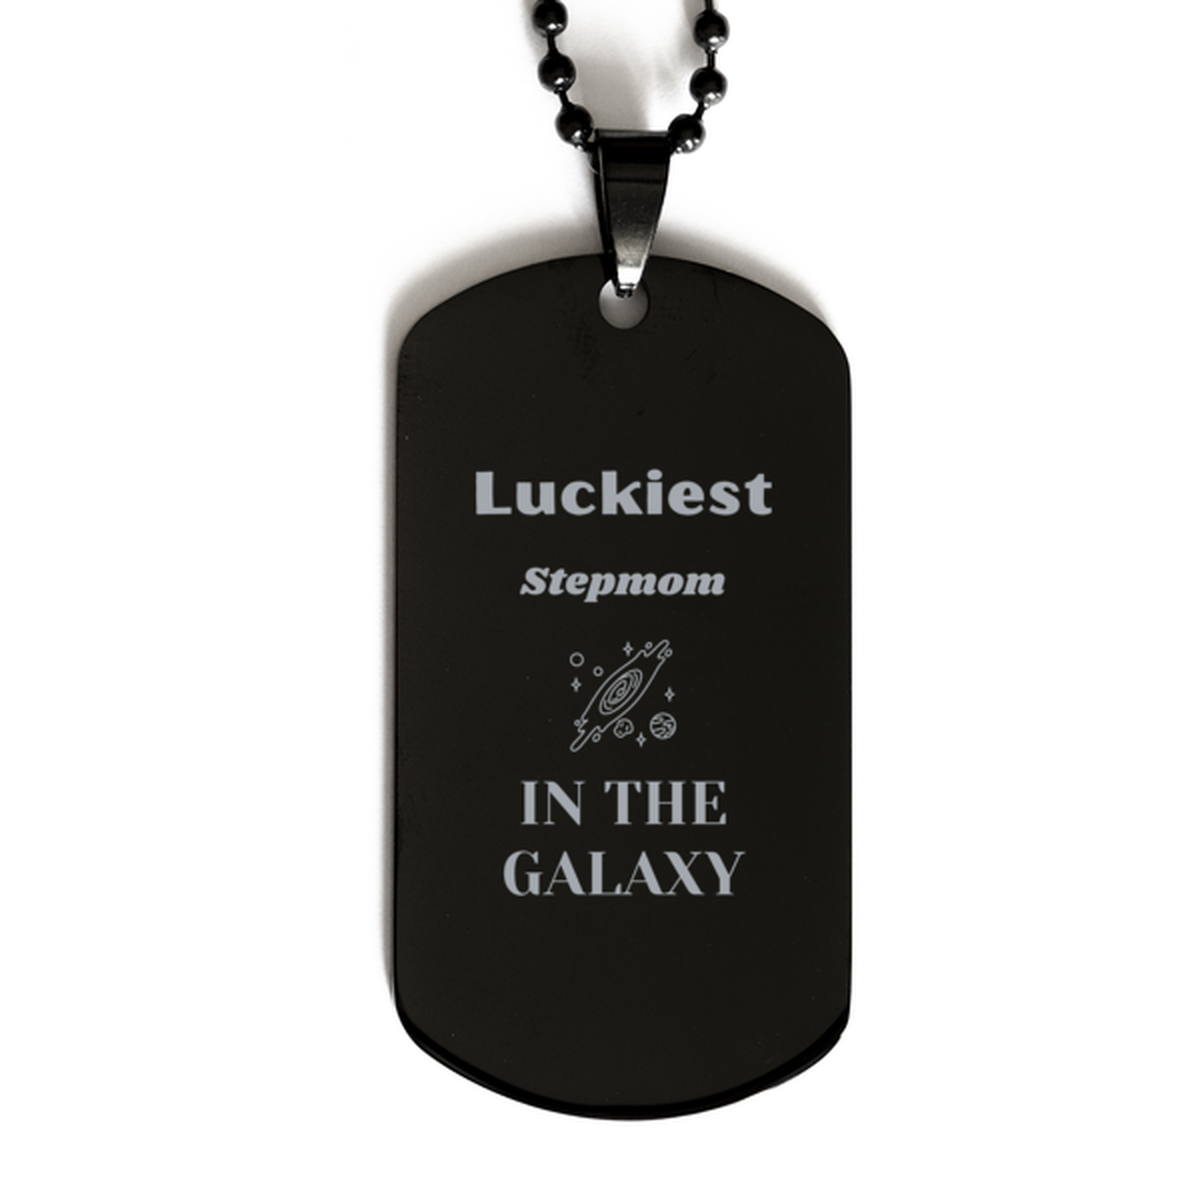 Luckiest Stepmom in the Galaxy, To My Stepmom Engraved Gifts, Christmas Stepmom Black Dog Tag Gifts, X-mas Birthday Unique Gifts For Stepmom Men Women